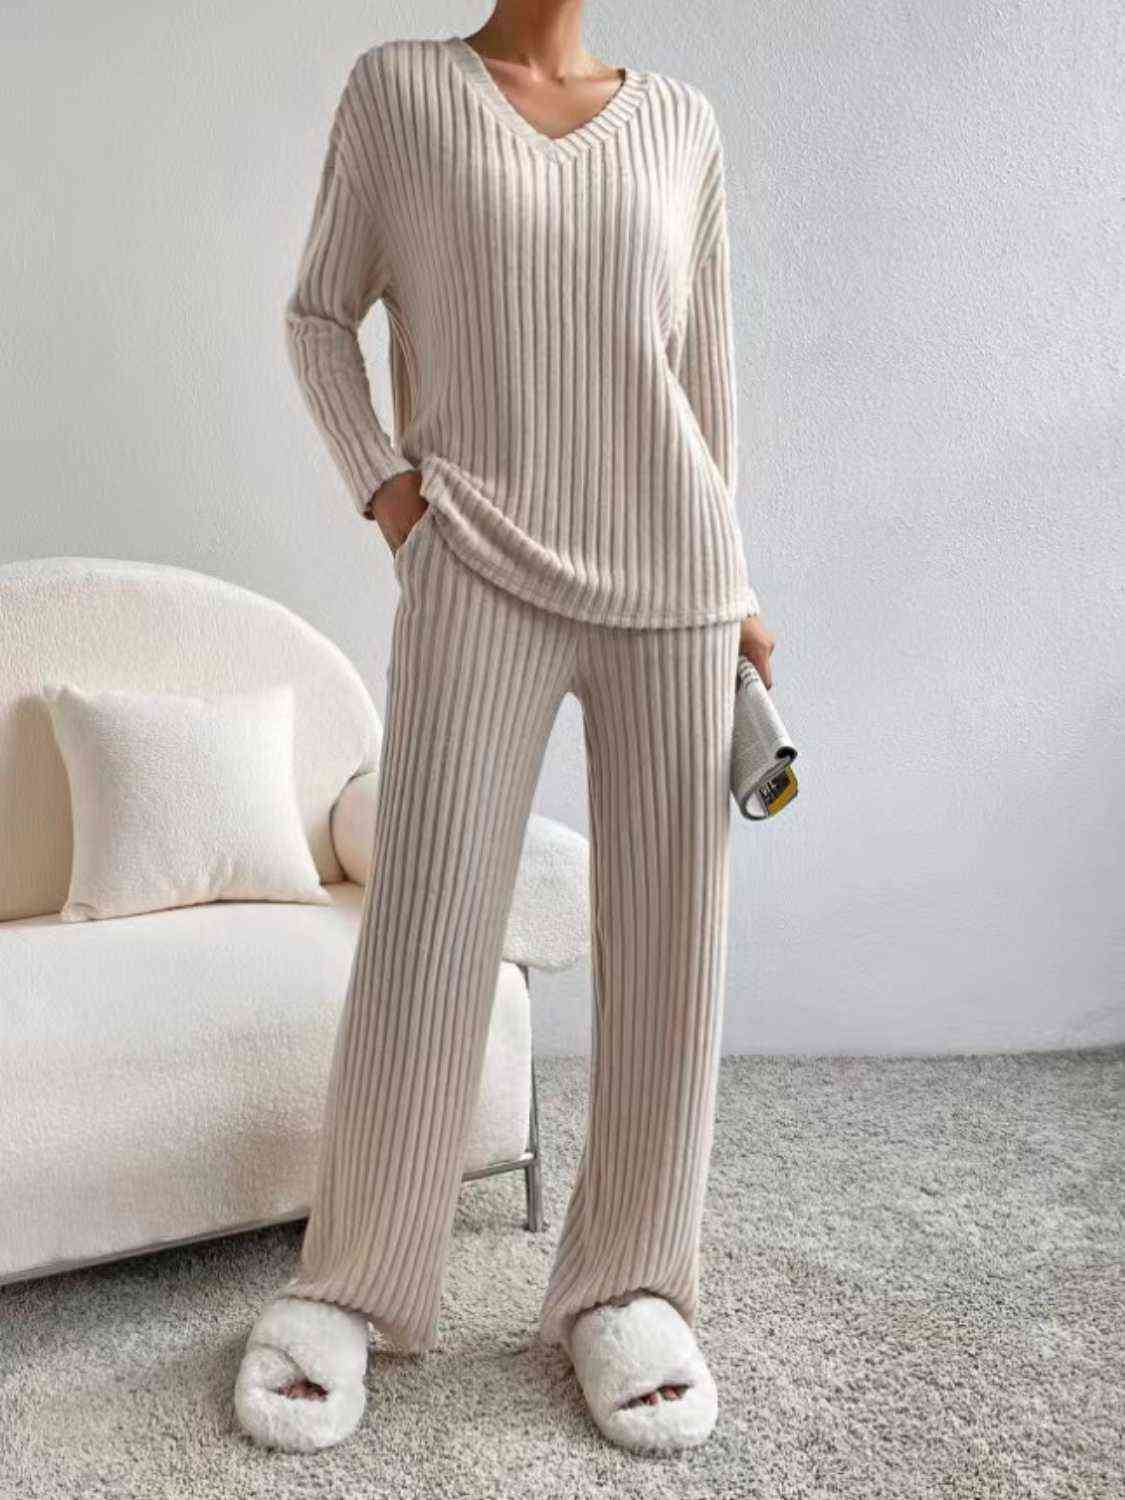 Ribbed V-Neck Long Sleeve Top and Pants Set (4 Colors) Outfit Sets Krazy Heart Designs Boutique Dust Storm XS 